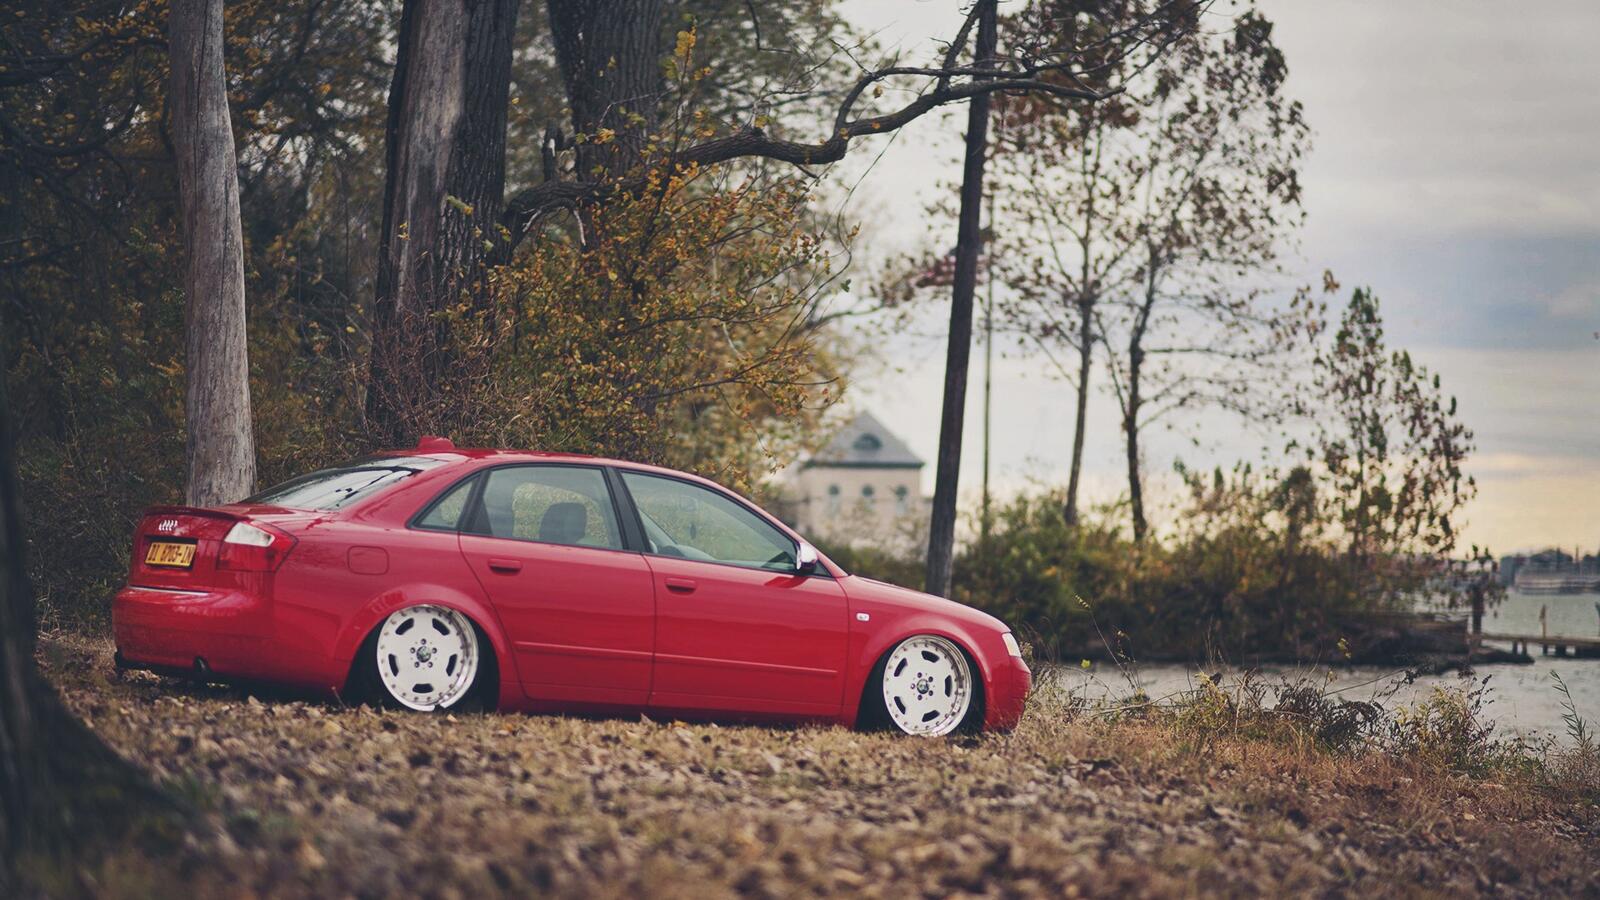 Free photo Understated Audi a4 in red stands on fallen leaves